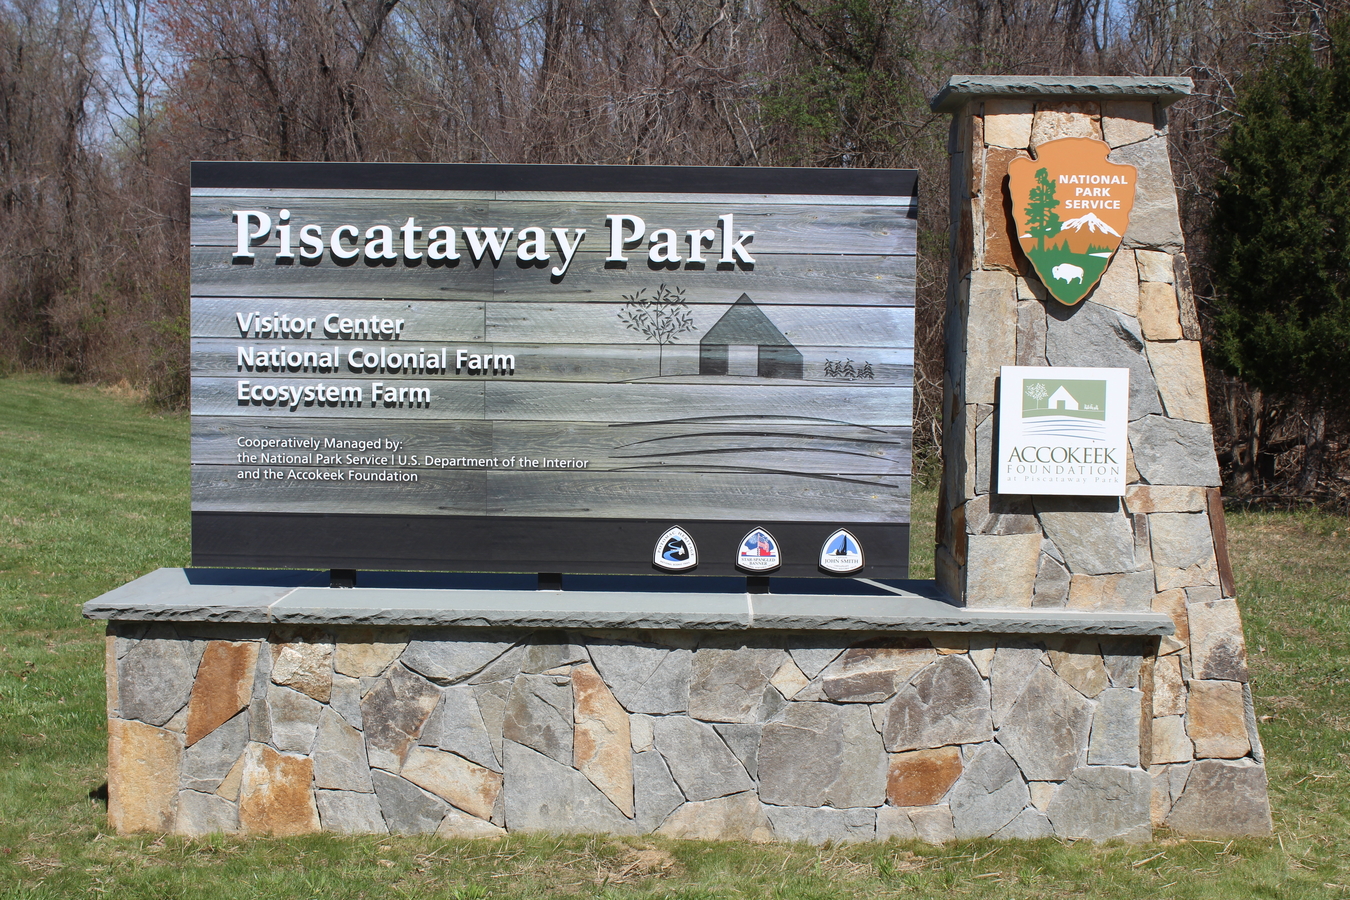 5b Accokeek Sign : Piscataway Park Sign was Designed Built and Installed in 6 weeks.